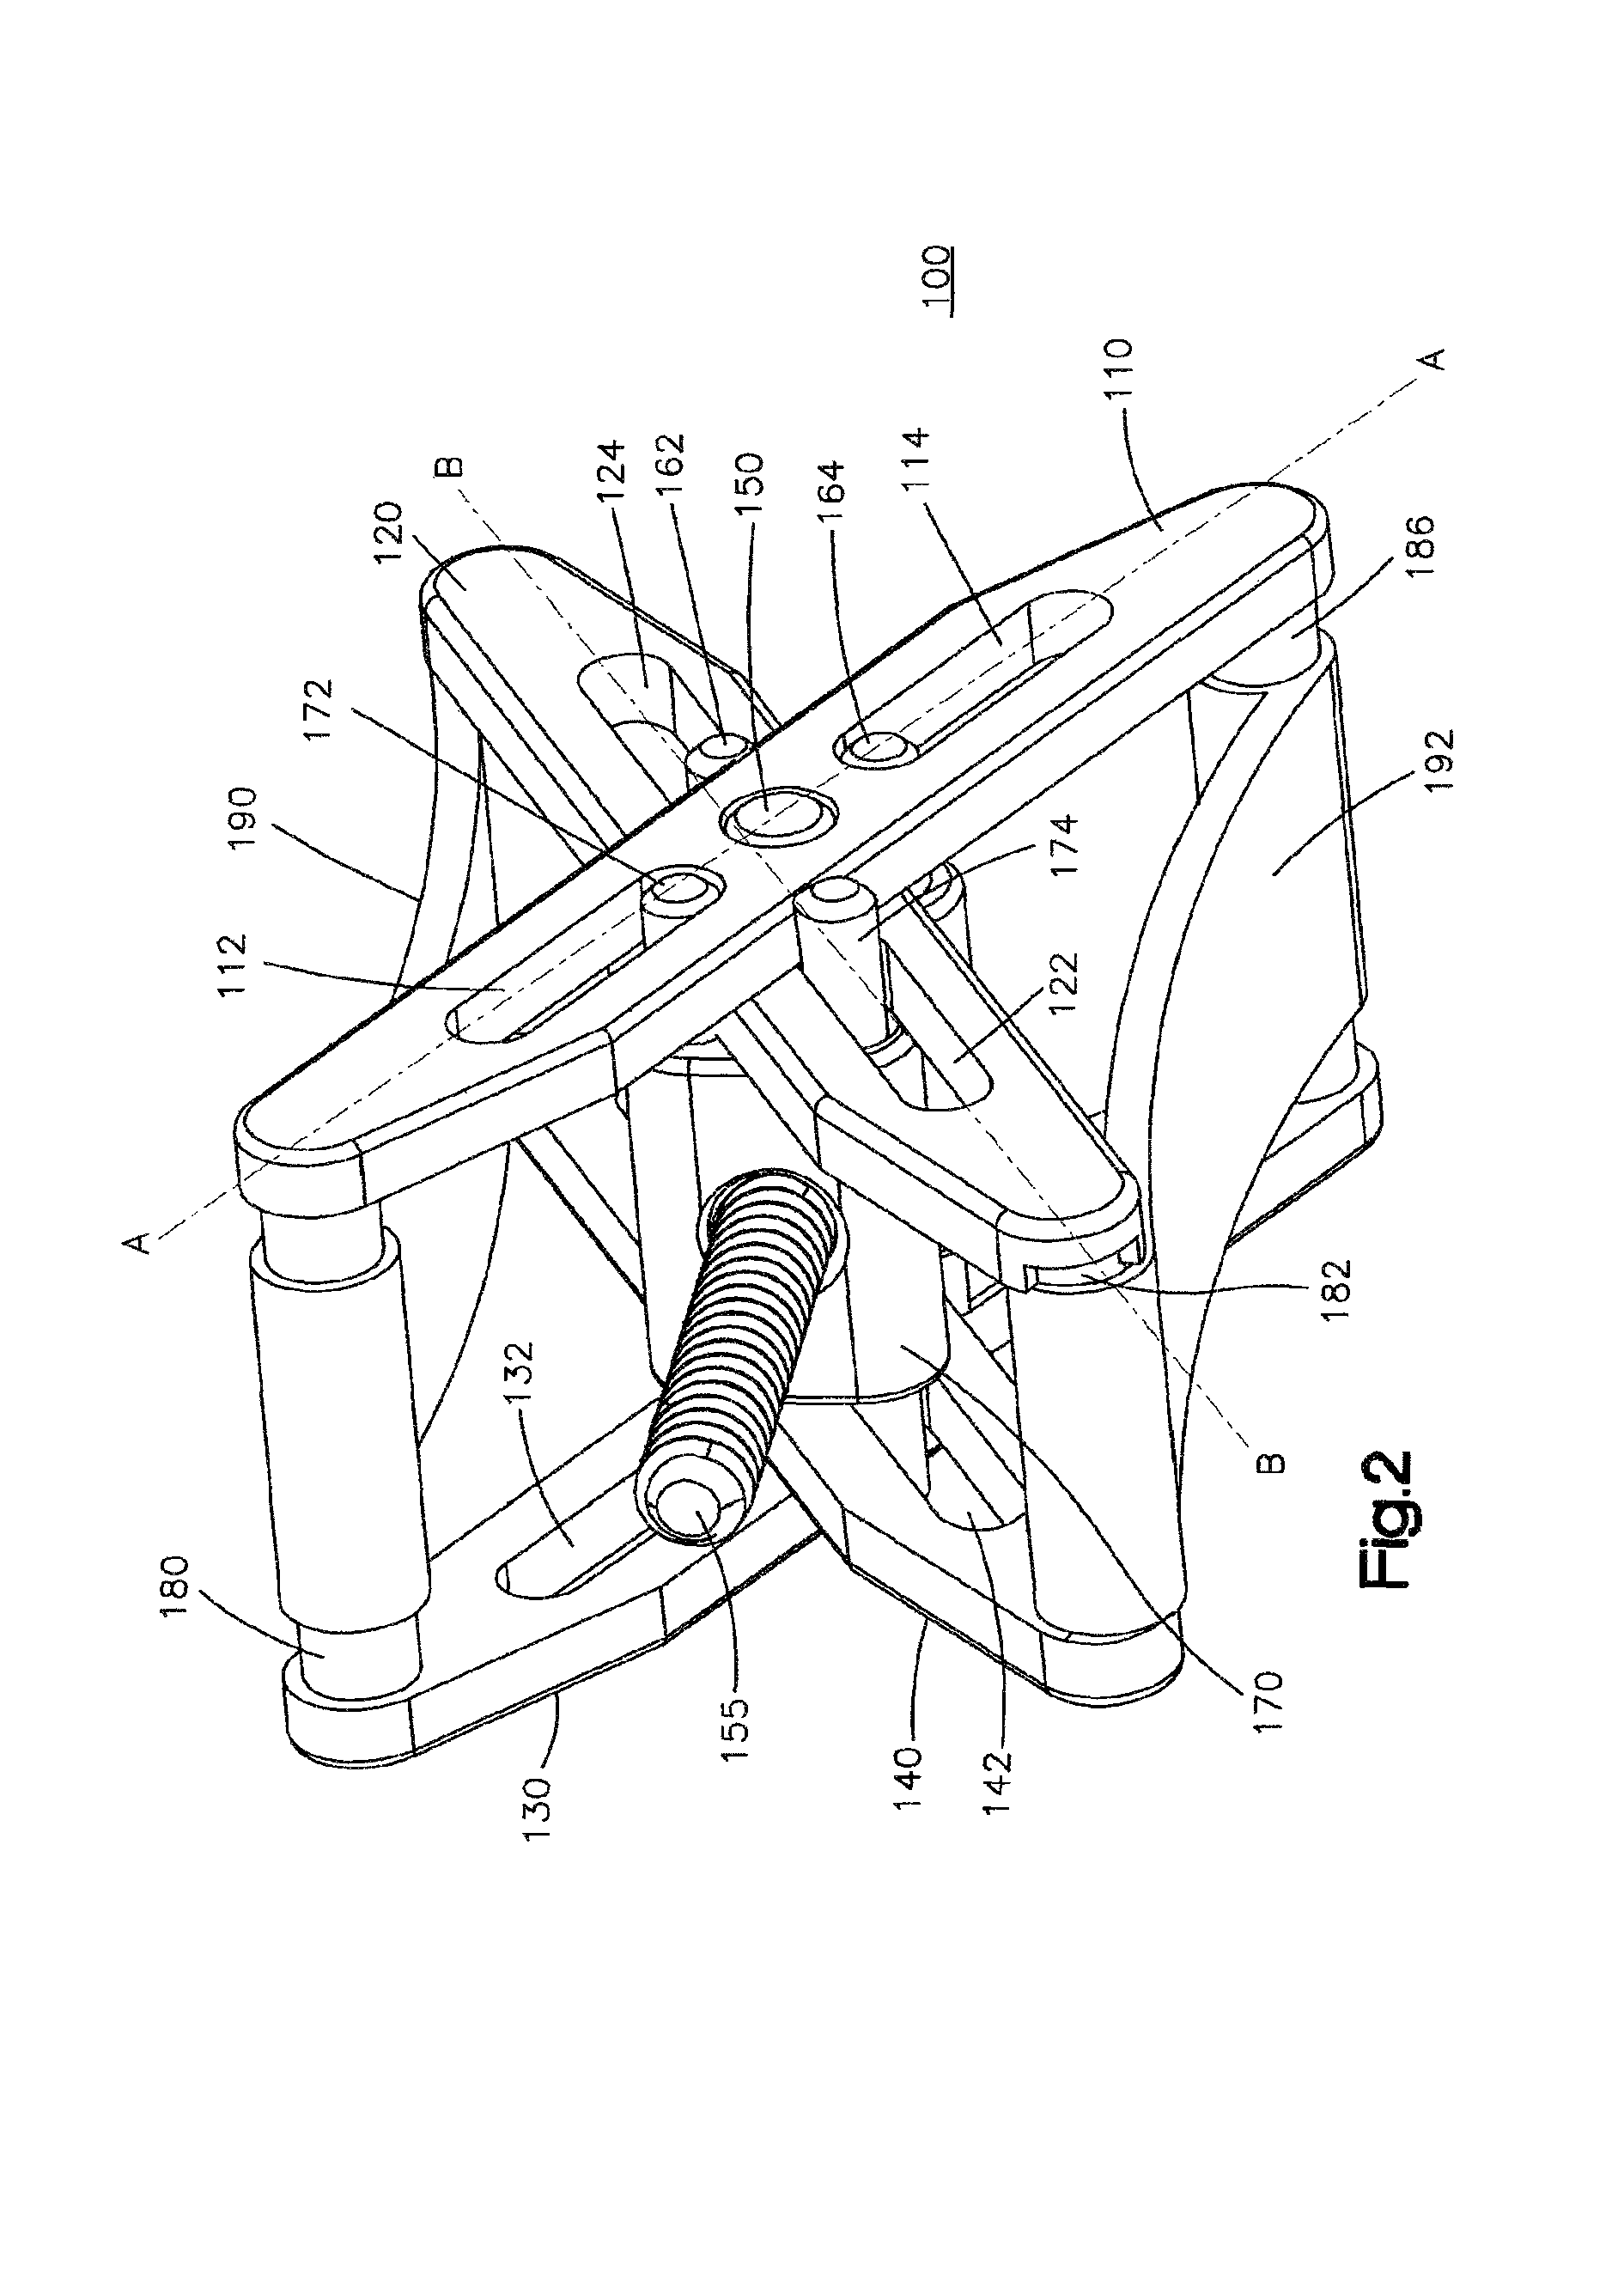 Expandable interspinous process spacer